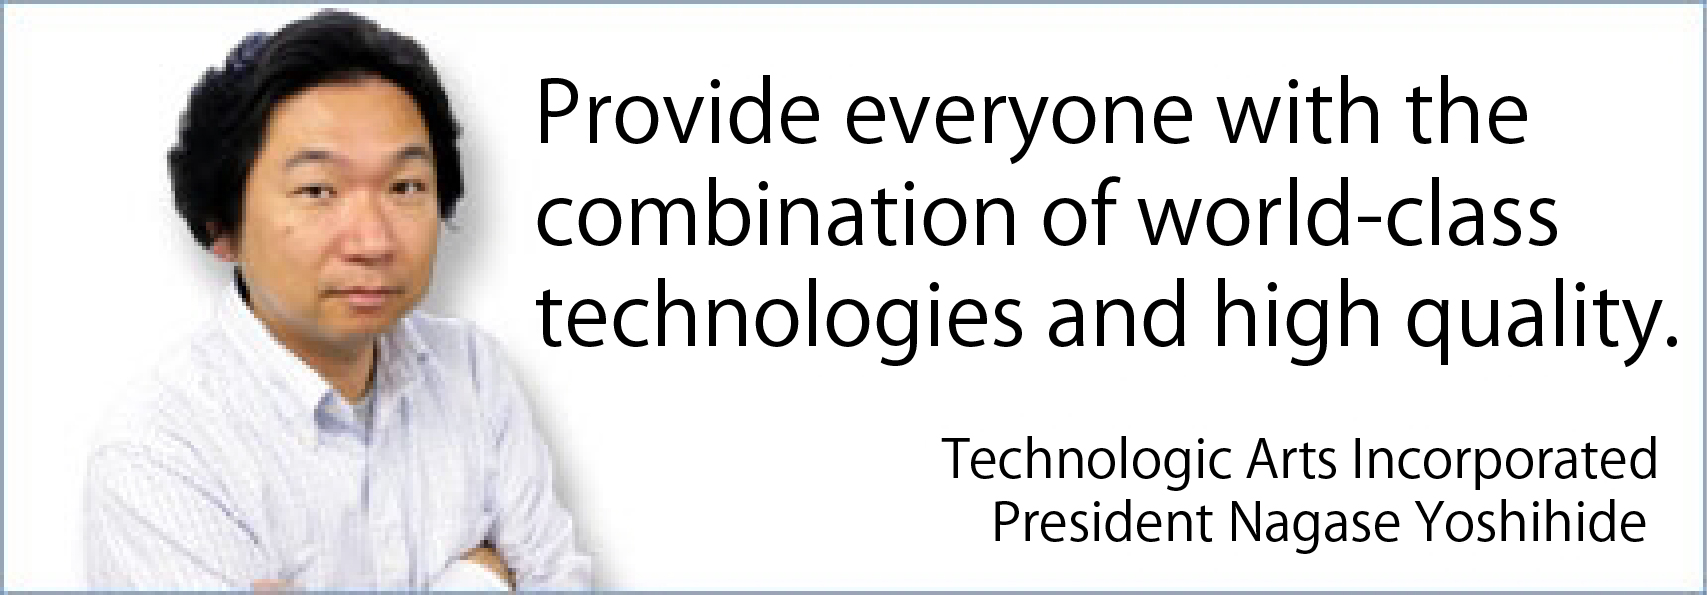 Provide everyone with the combination of world-class technologies and high quality.